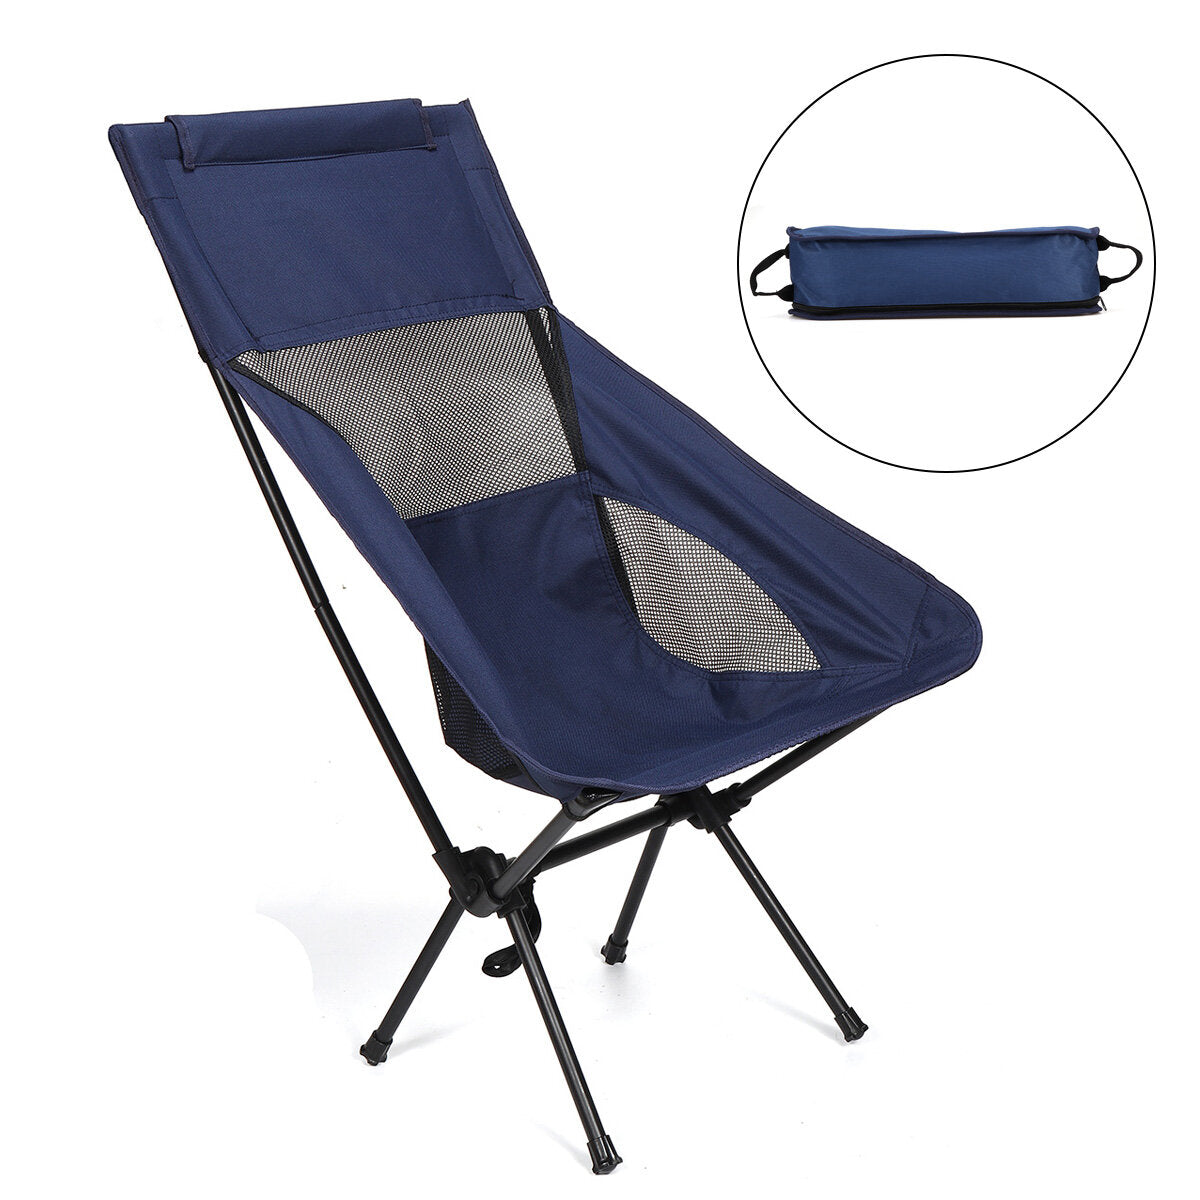 Folding Moon Chair Lightweight Fishing Stool Camping BBQ Seat Outdoor Travel Max Load 265lbs